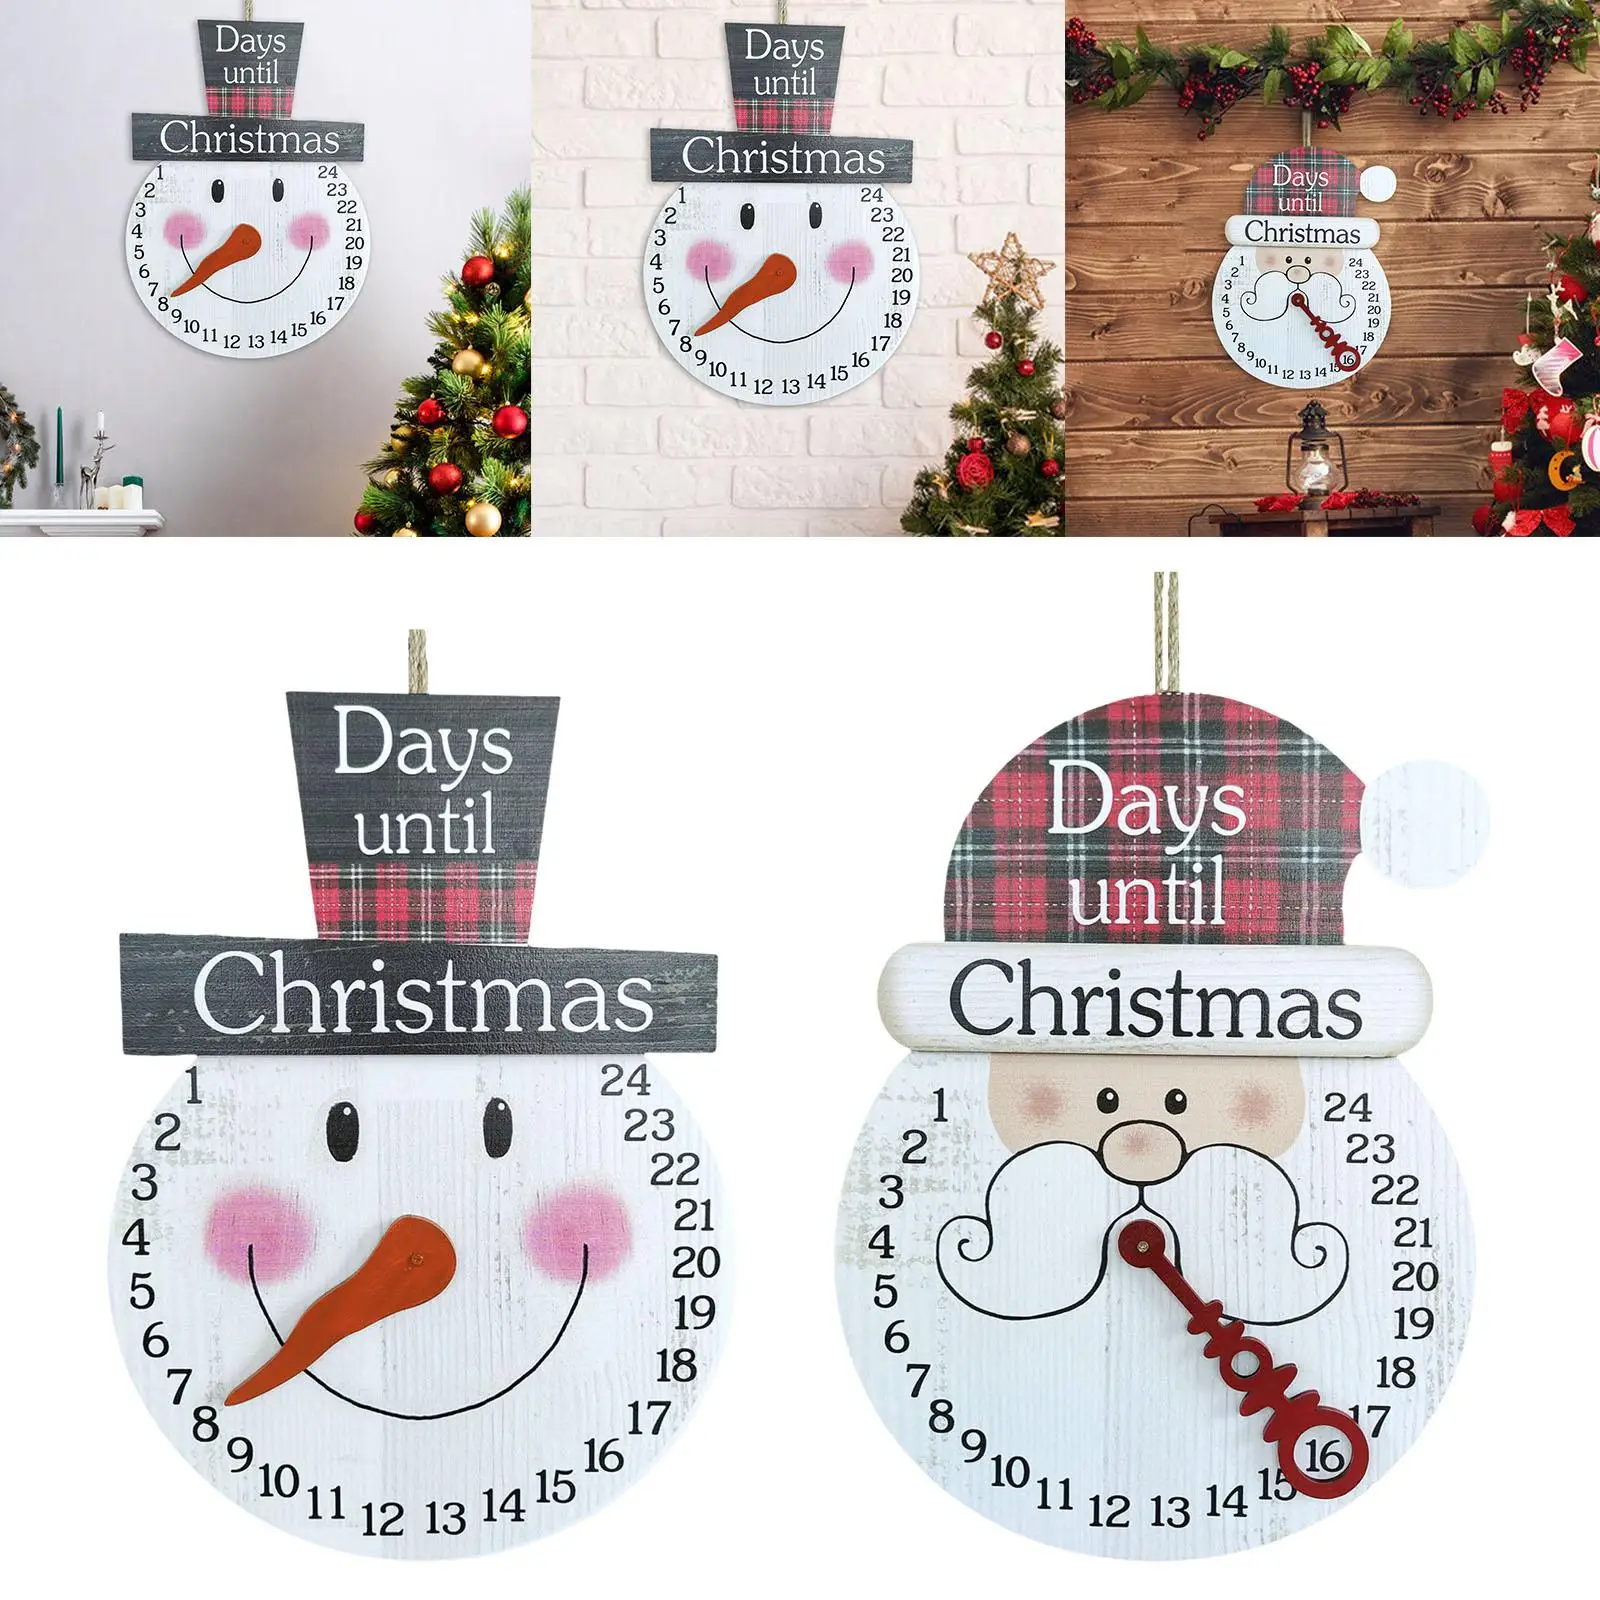 Wooden Christmas Sign, Calendar Hanging Wood Background crafts for Desk Decoration Holiday Xmas